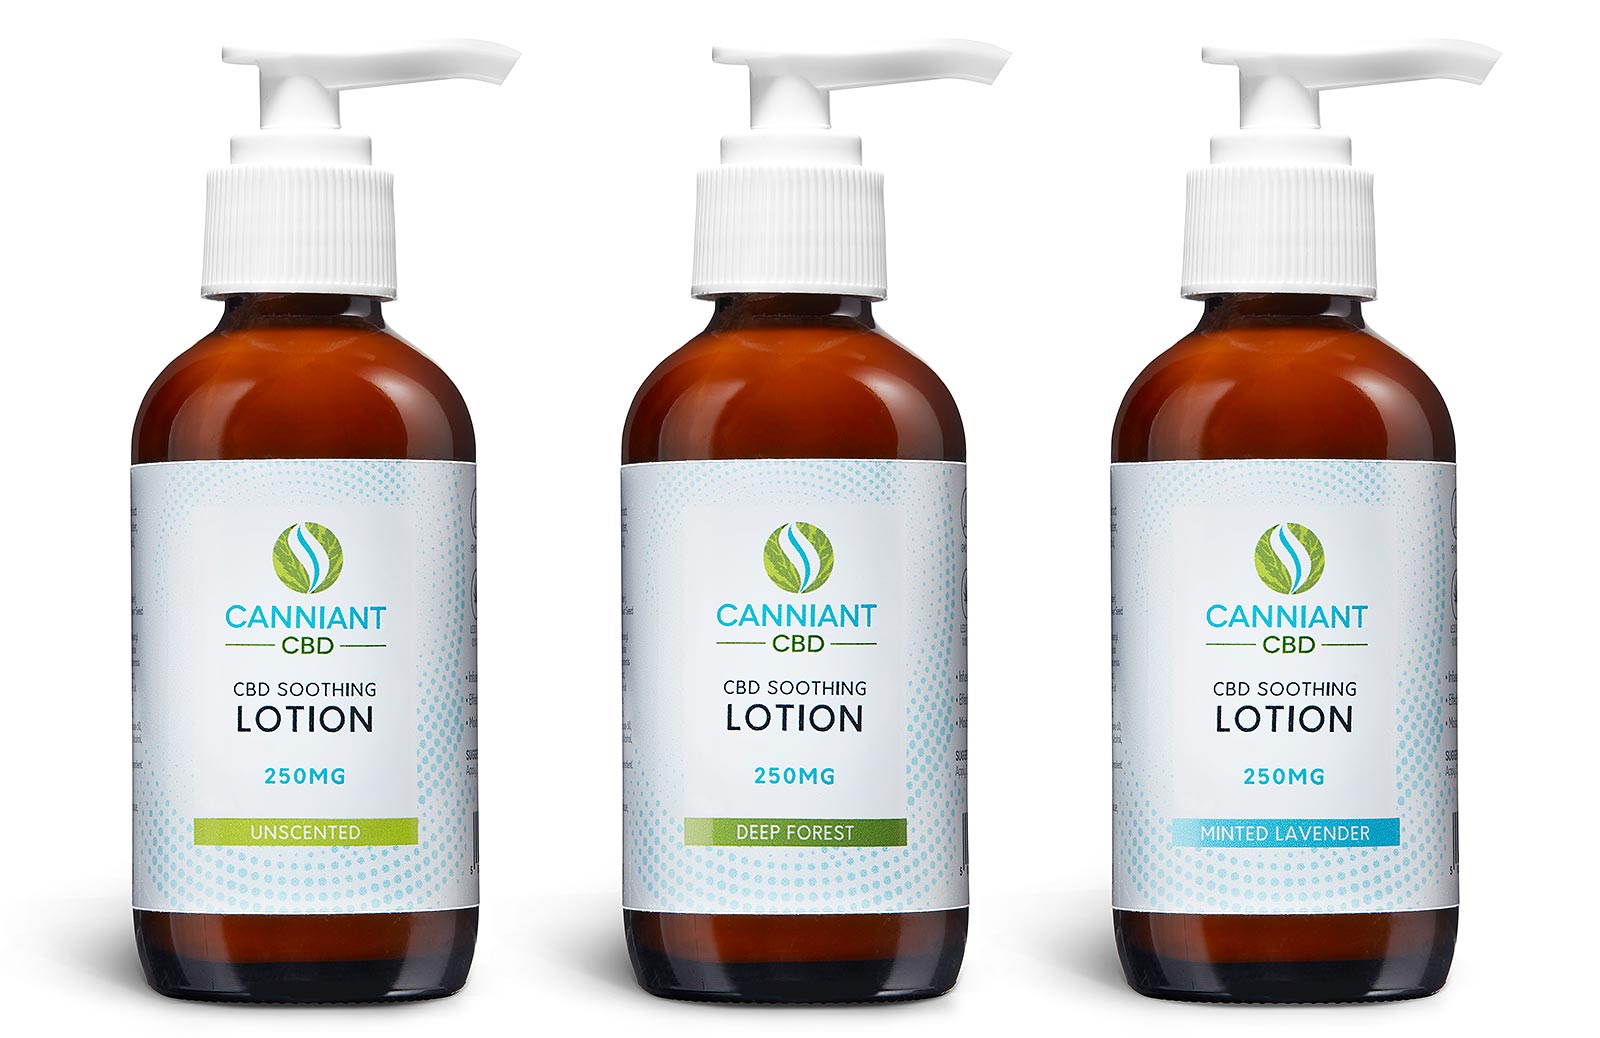 Canniant CBD Soothing Lotions Label Design